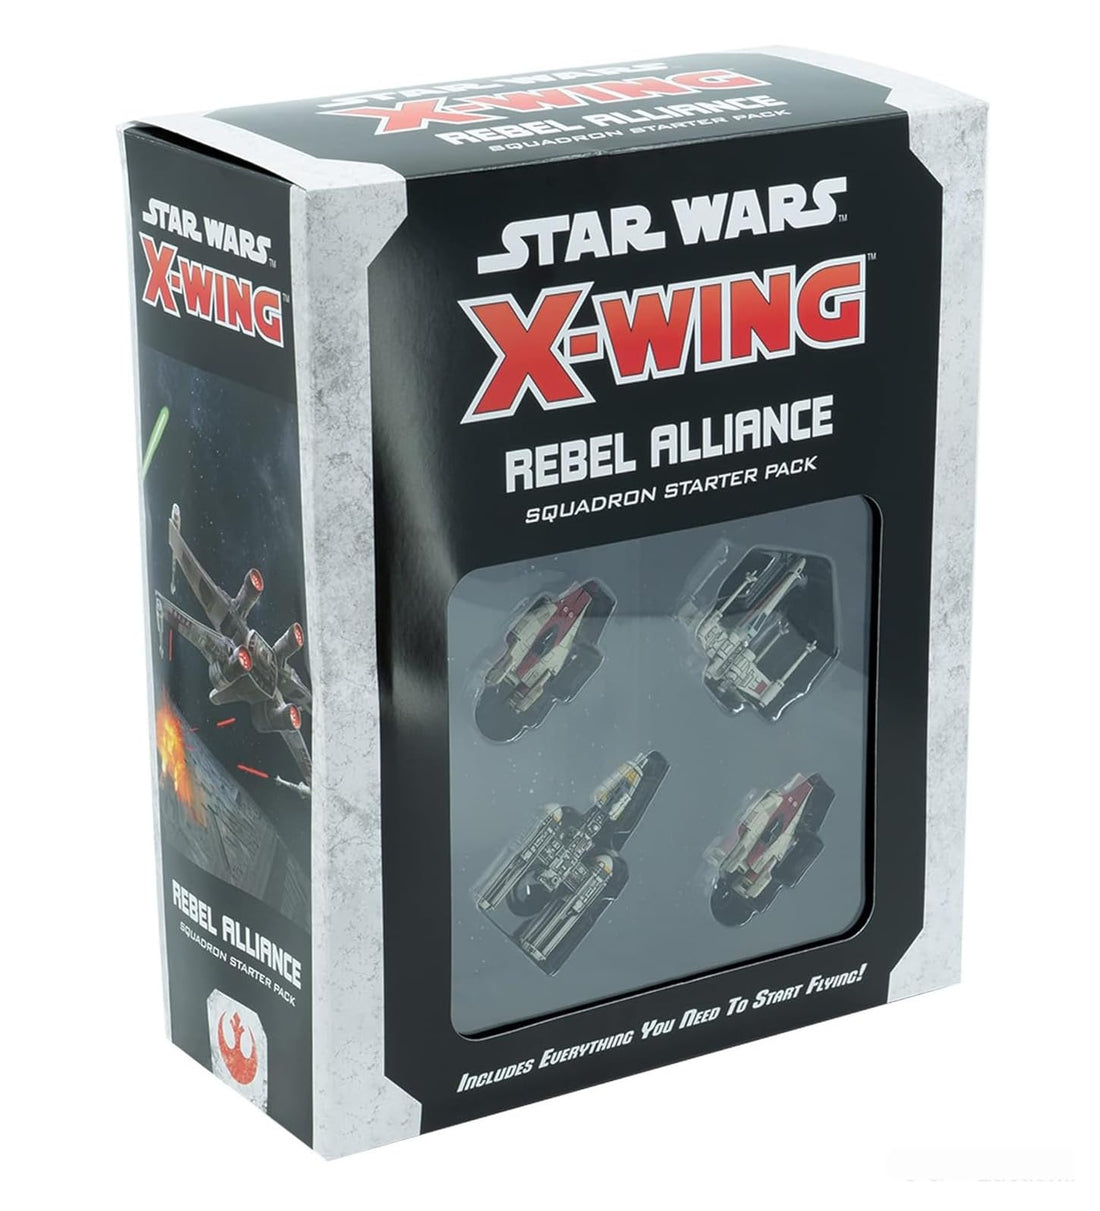 Atomic Mass Games |Star Wars X-Wing: Rebel Alliance Squadron Starter Pack | Tabletop Miniatures Game | Ages 14+ | 2 Players | 90 Minutes Playing Time